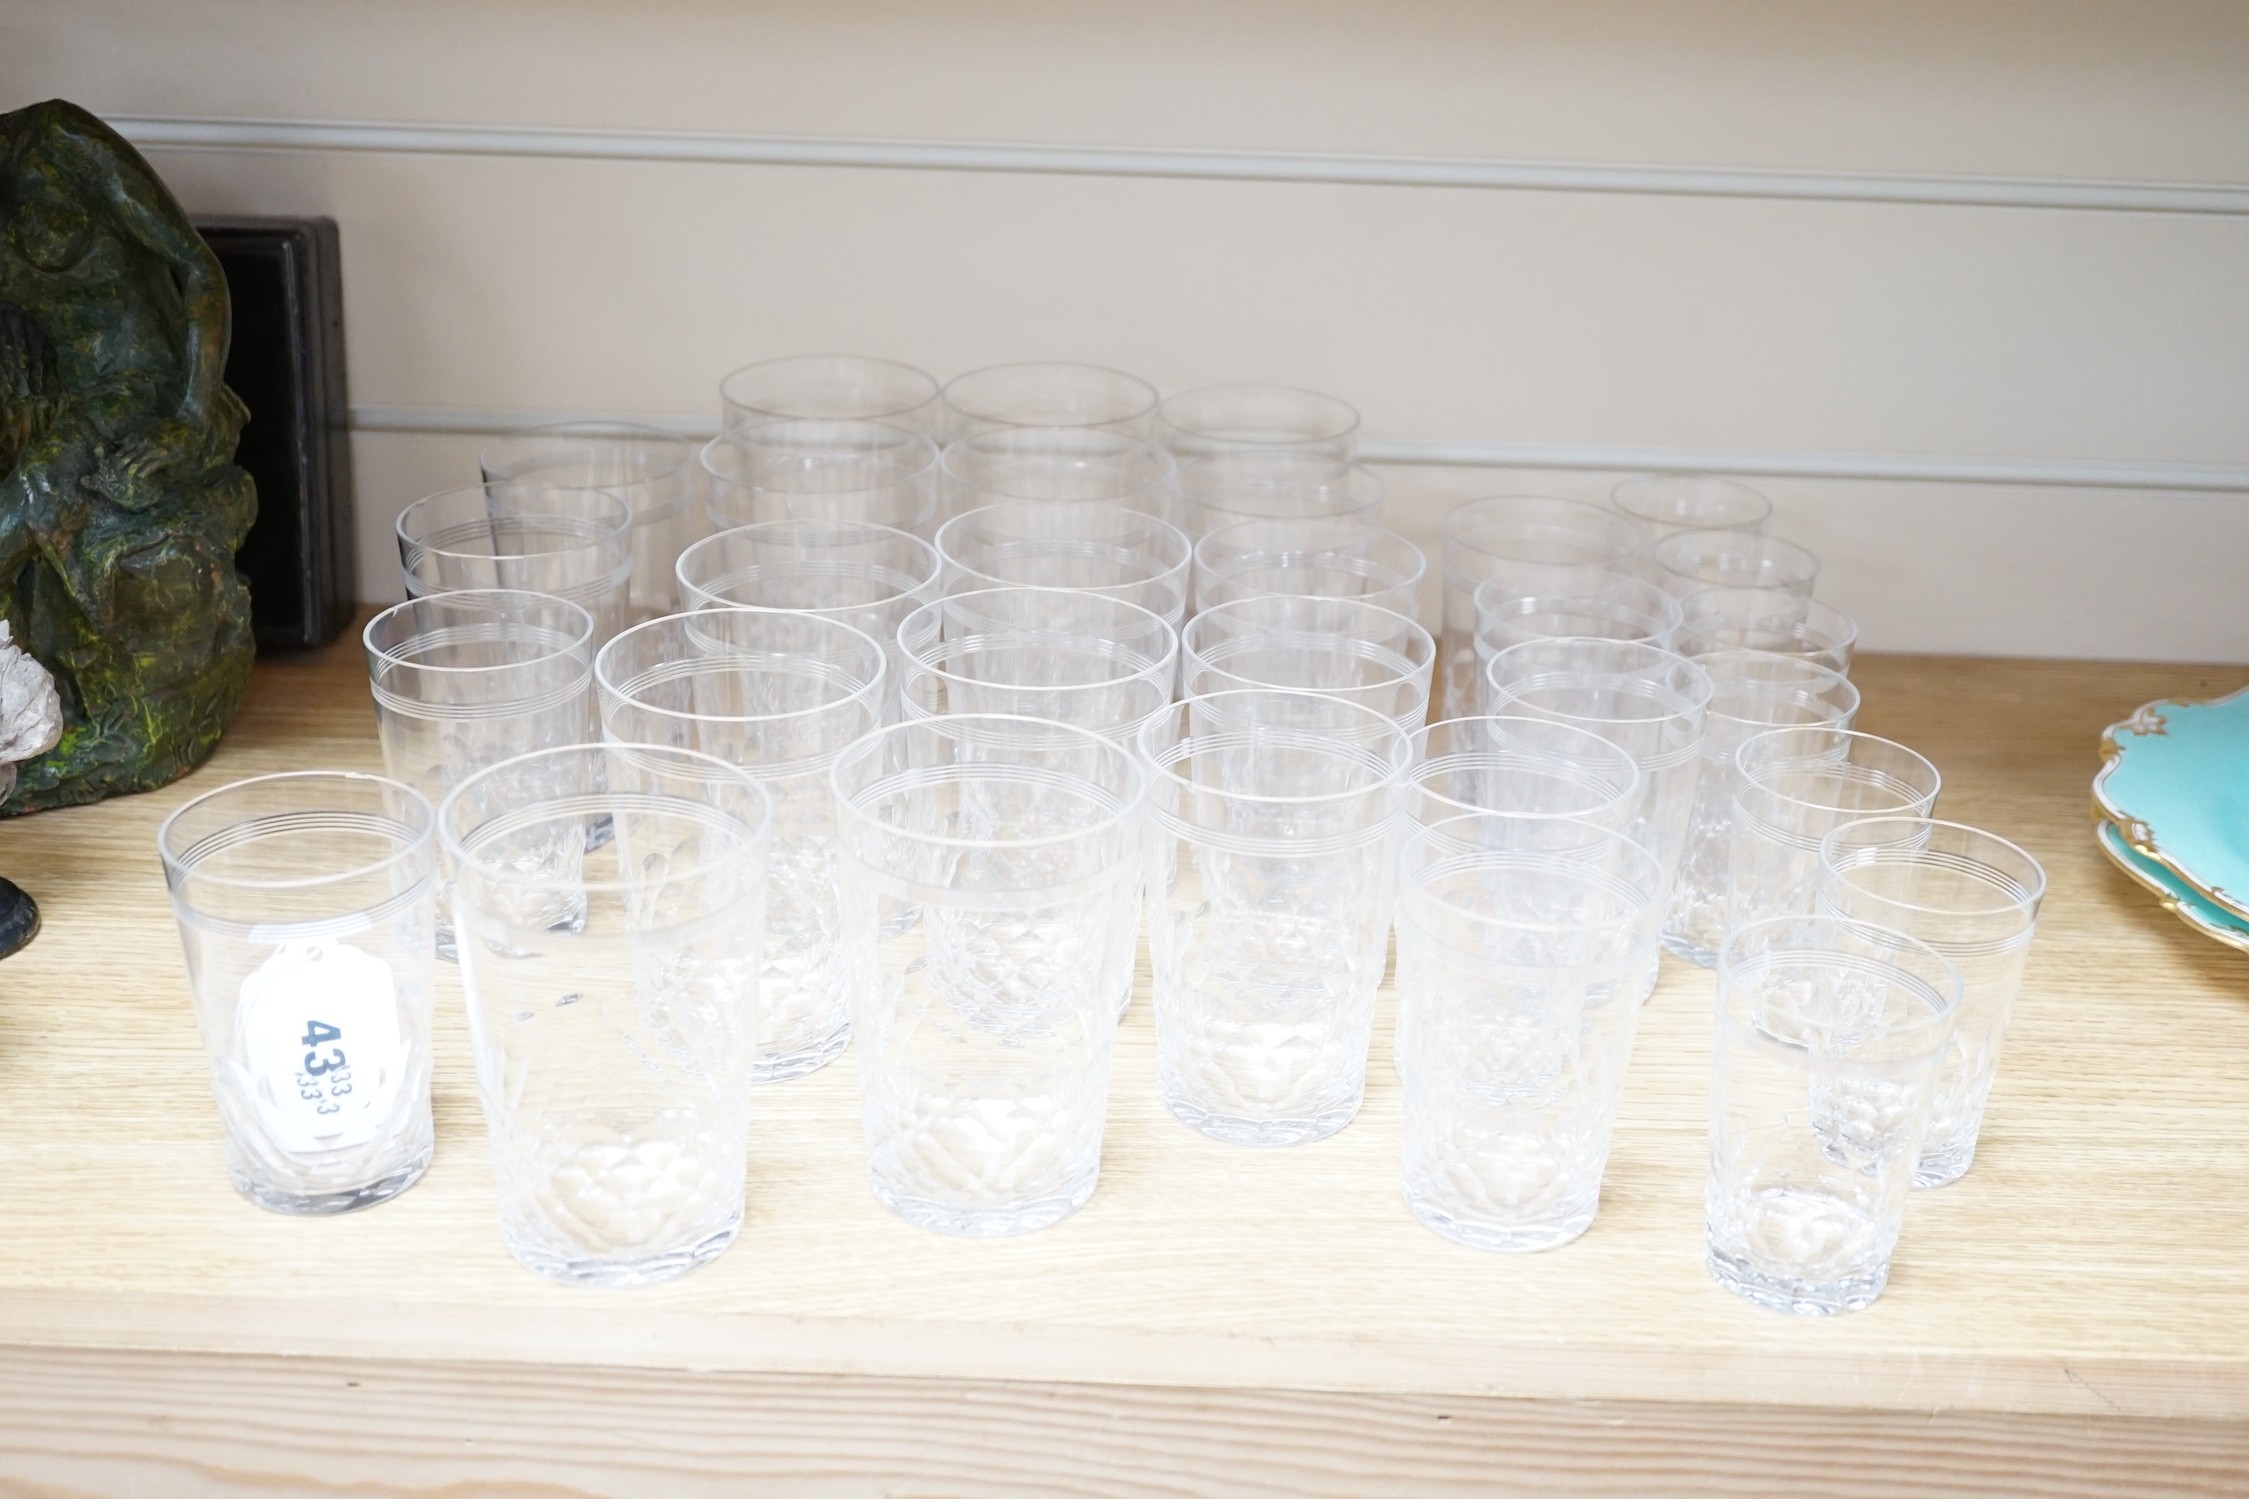 31 Baccarat tumblers in 4 sizes